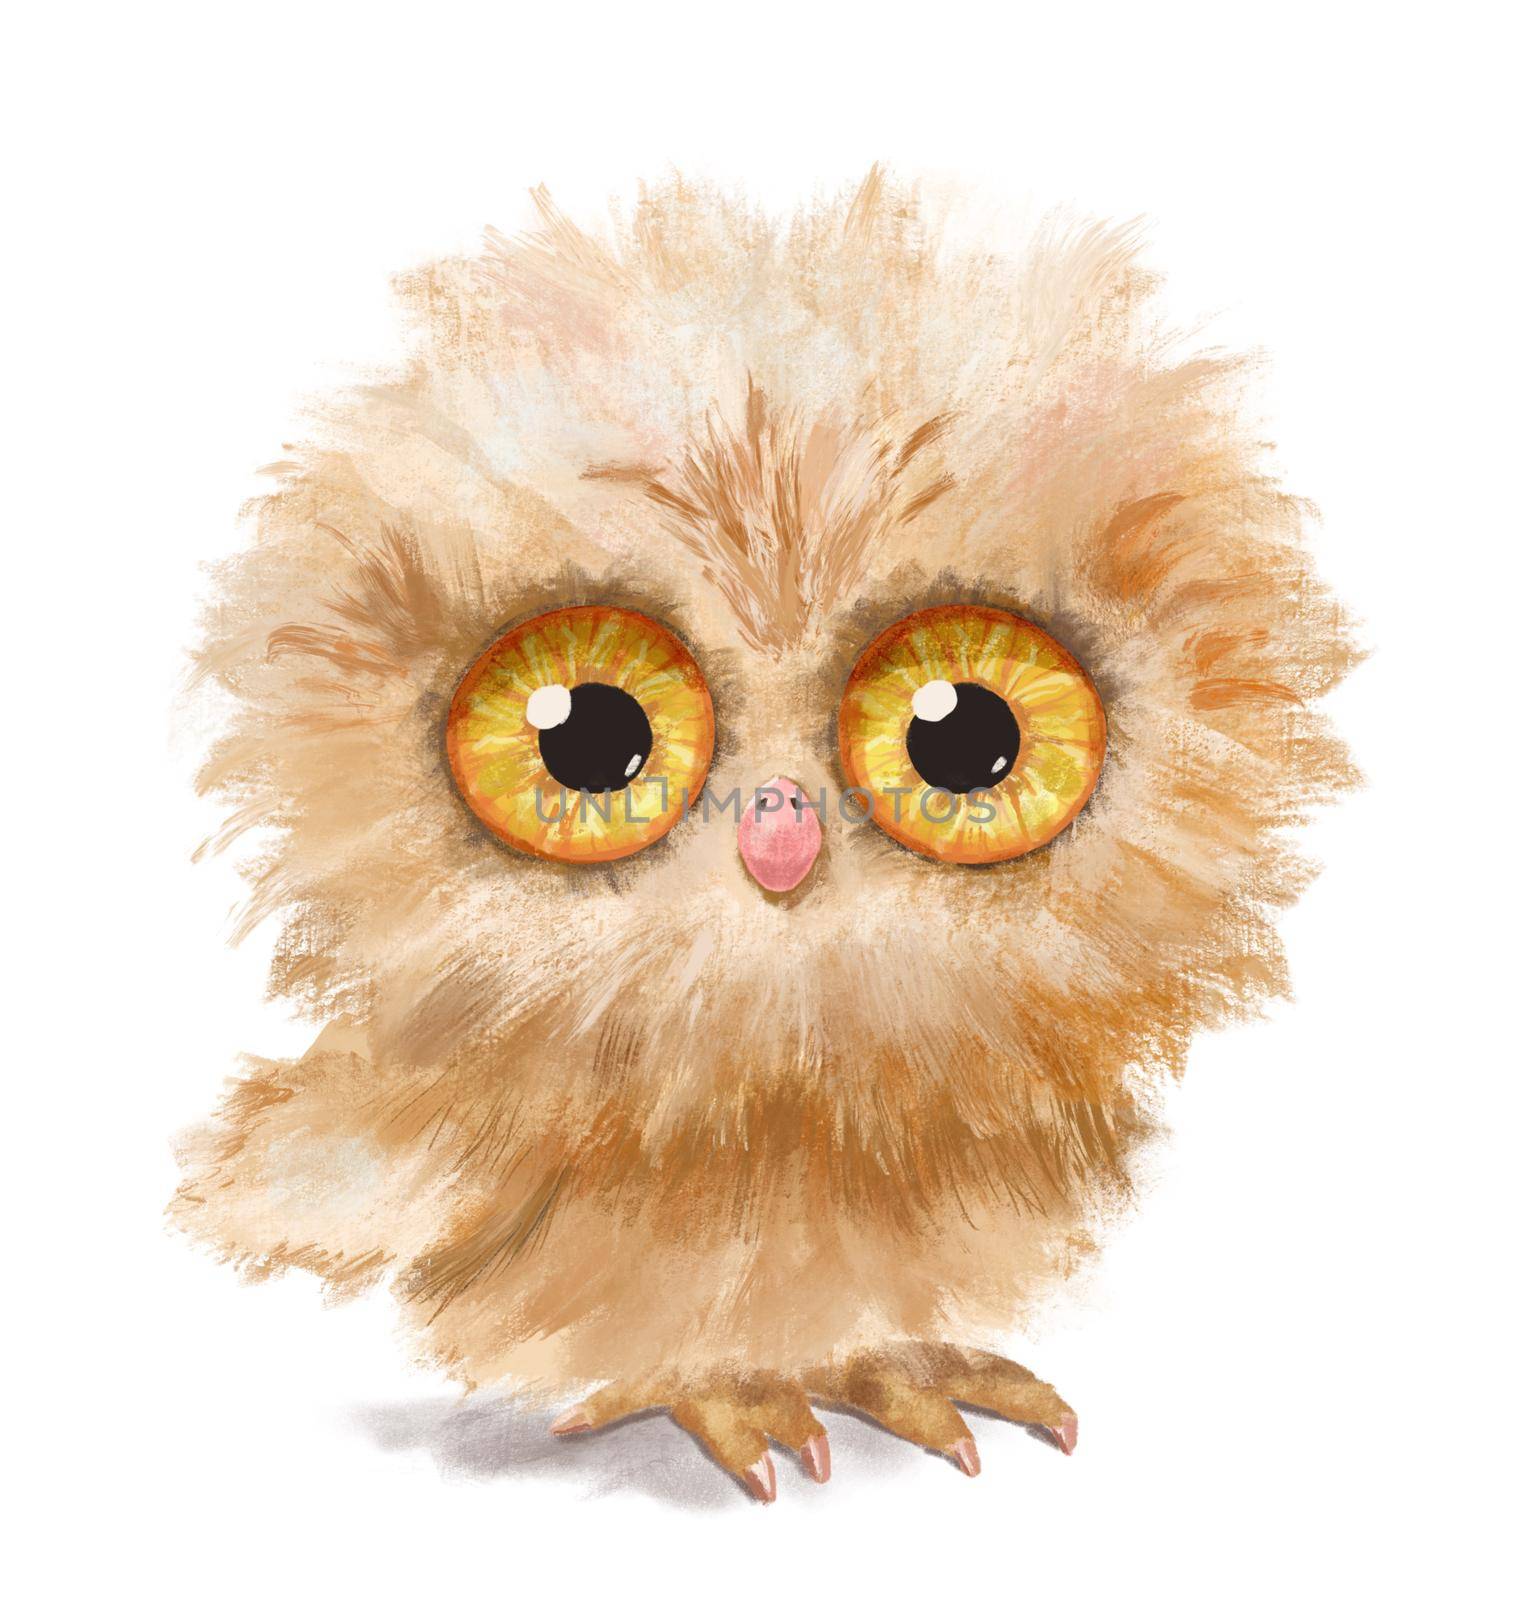 Cute funny fluffy sitting owl with big yellow eyes. Watercolor character illustration Isolated on white background.